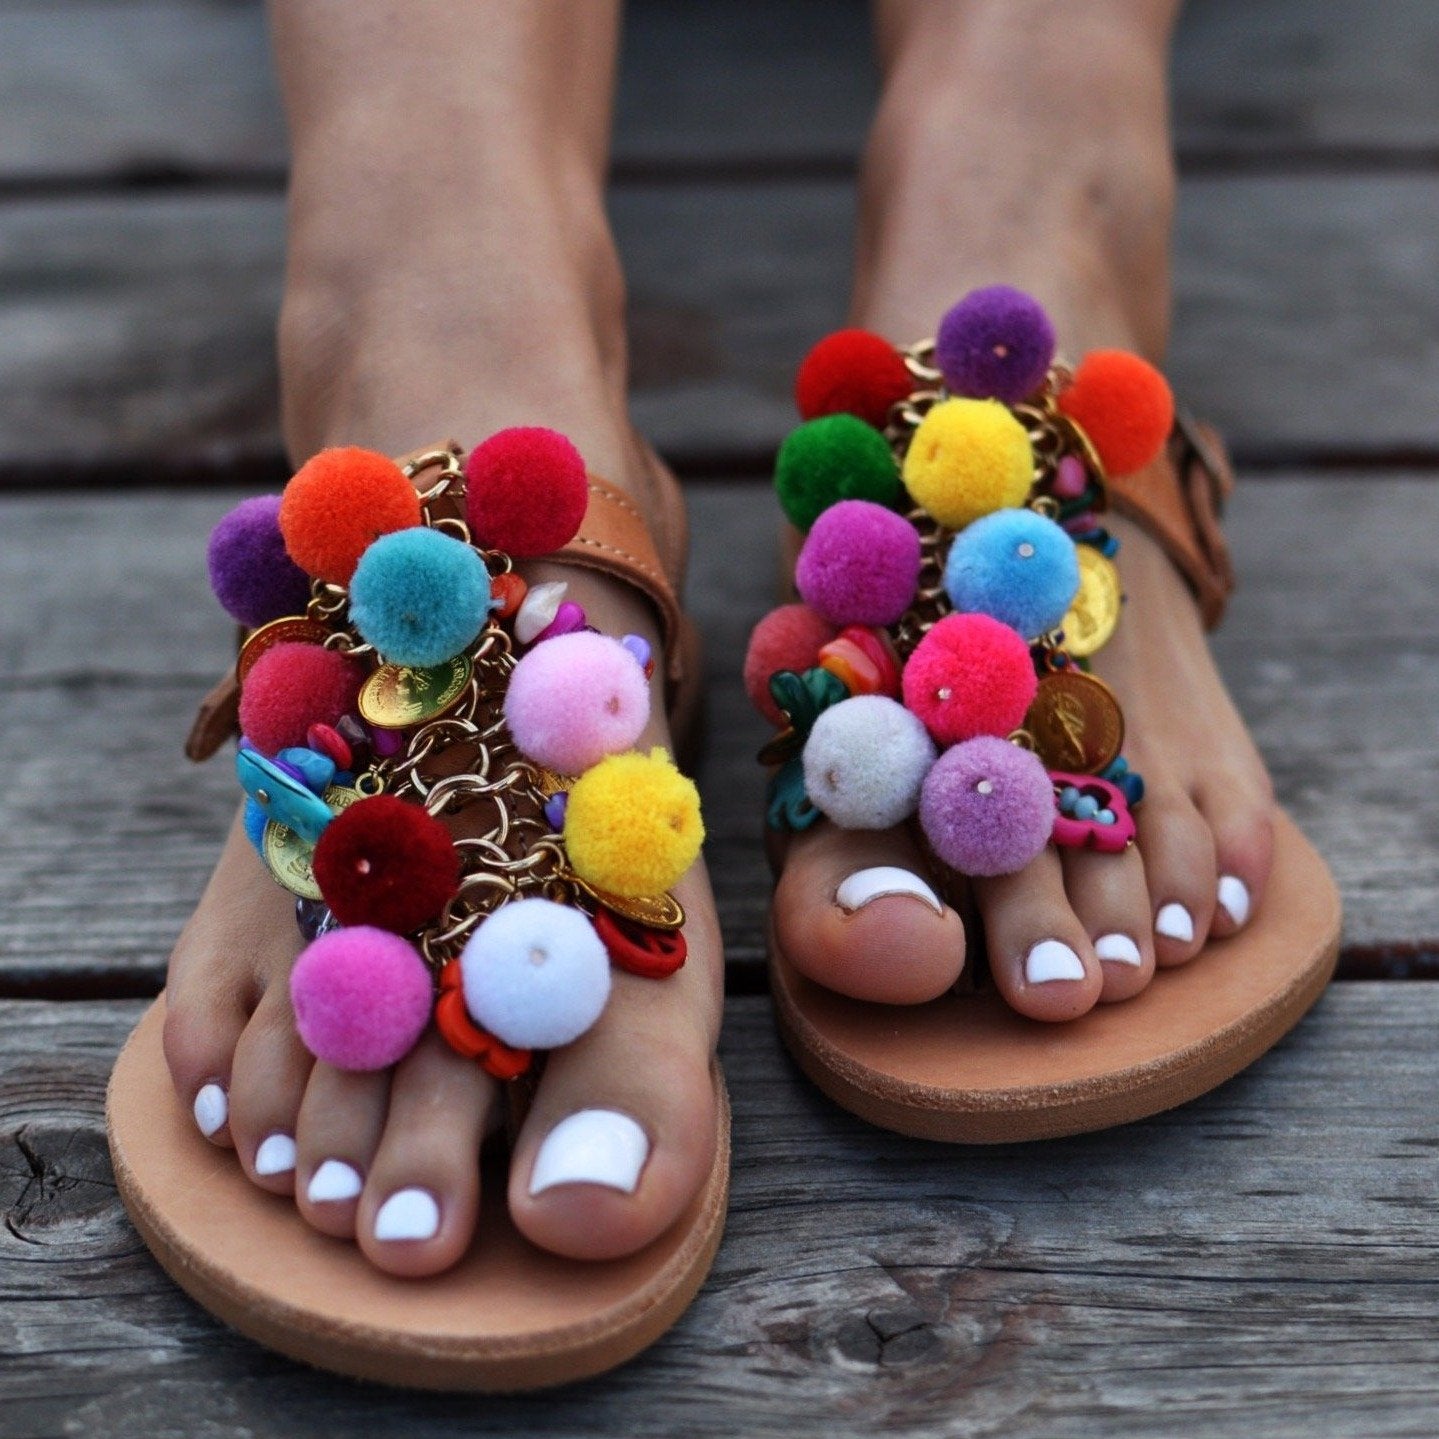 sandals for women, sandals made in greece, colorful sandals